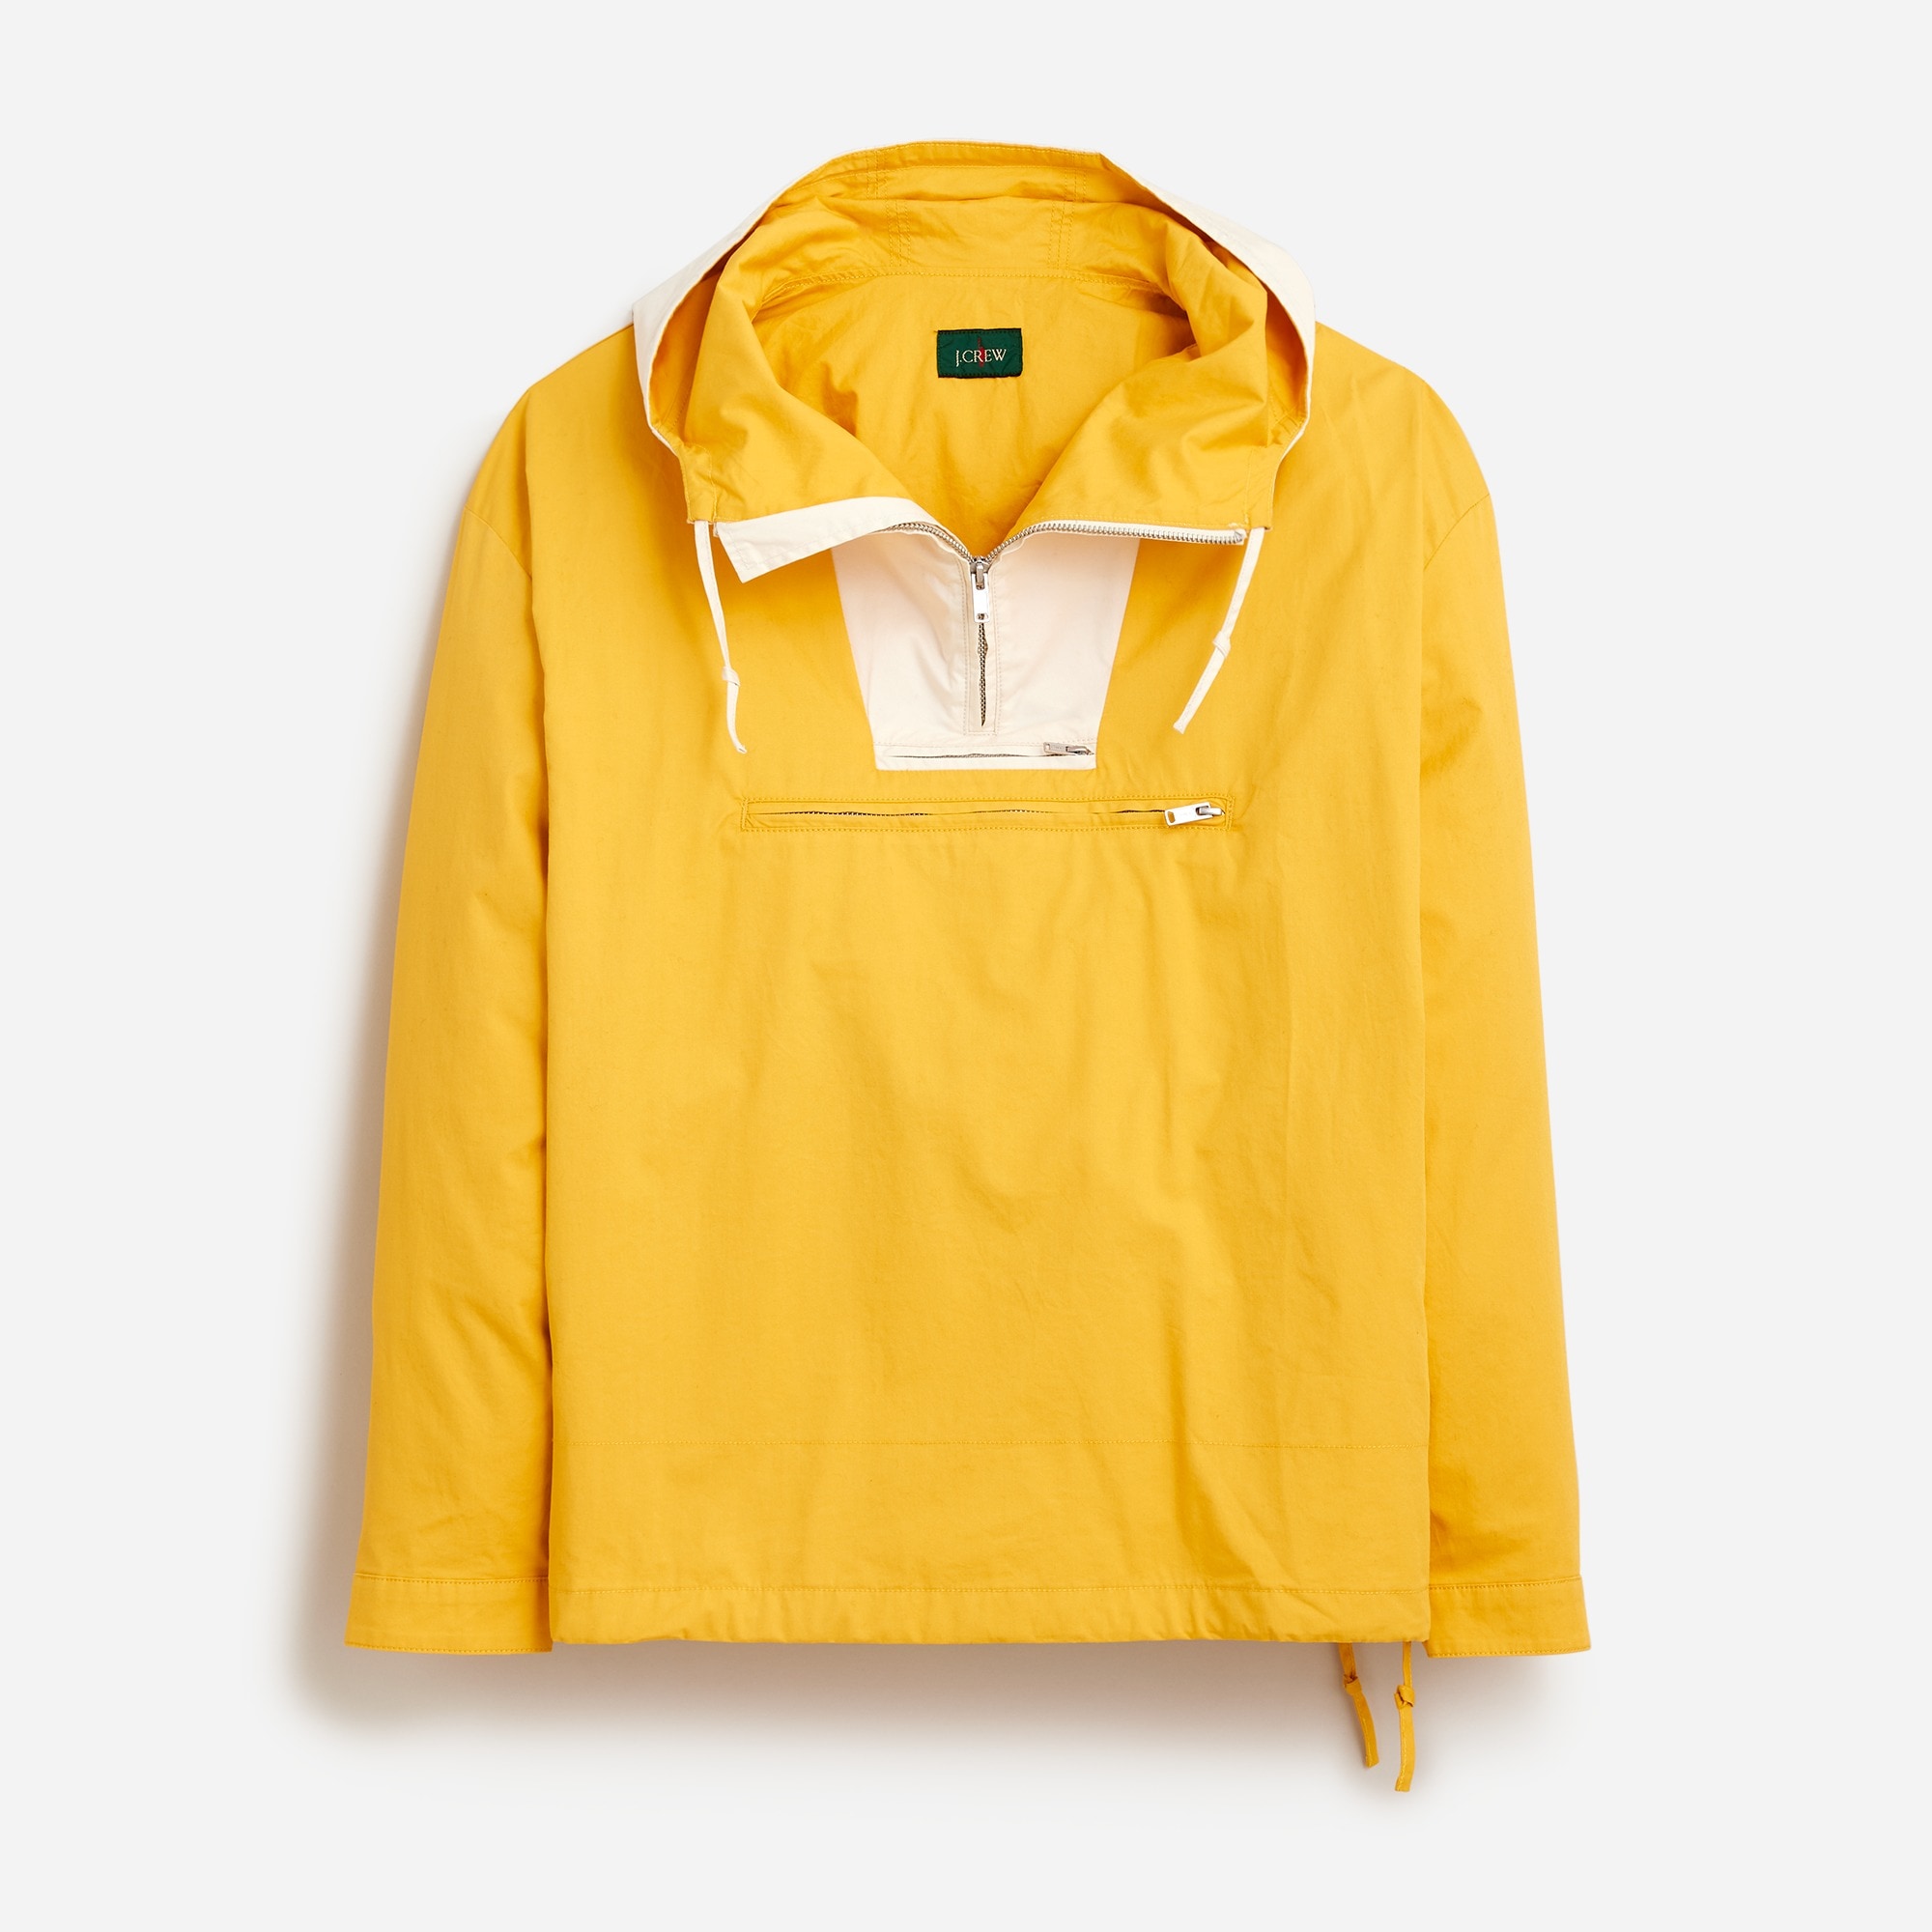 Jcrew Limited-edition 1989 heritage anorak in cotton